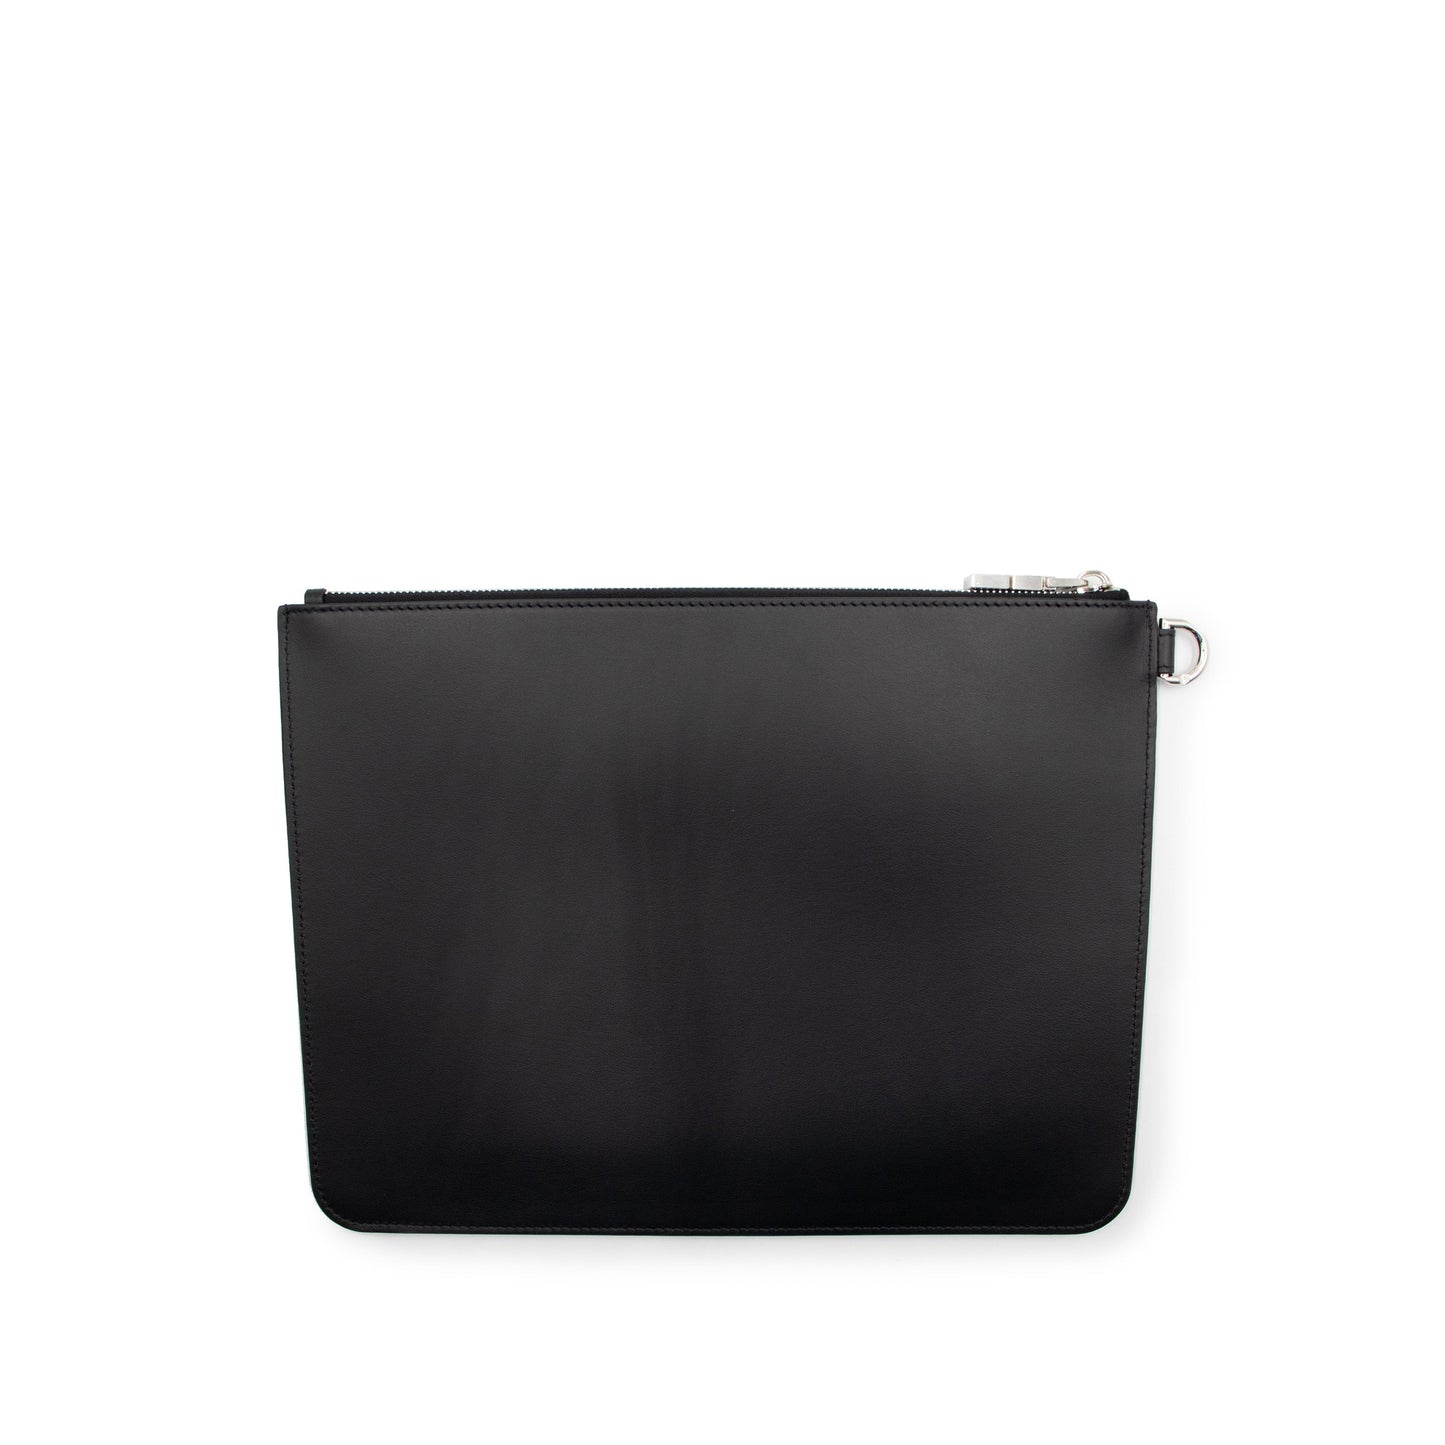 Ring Large Zipped Pouch in Black